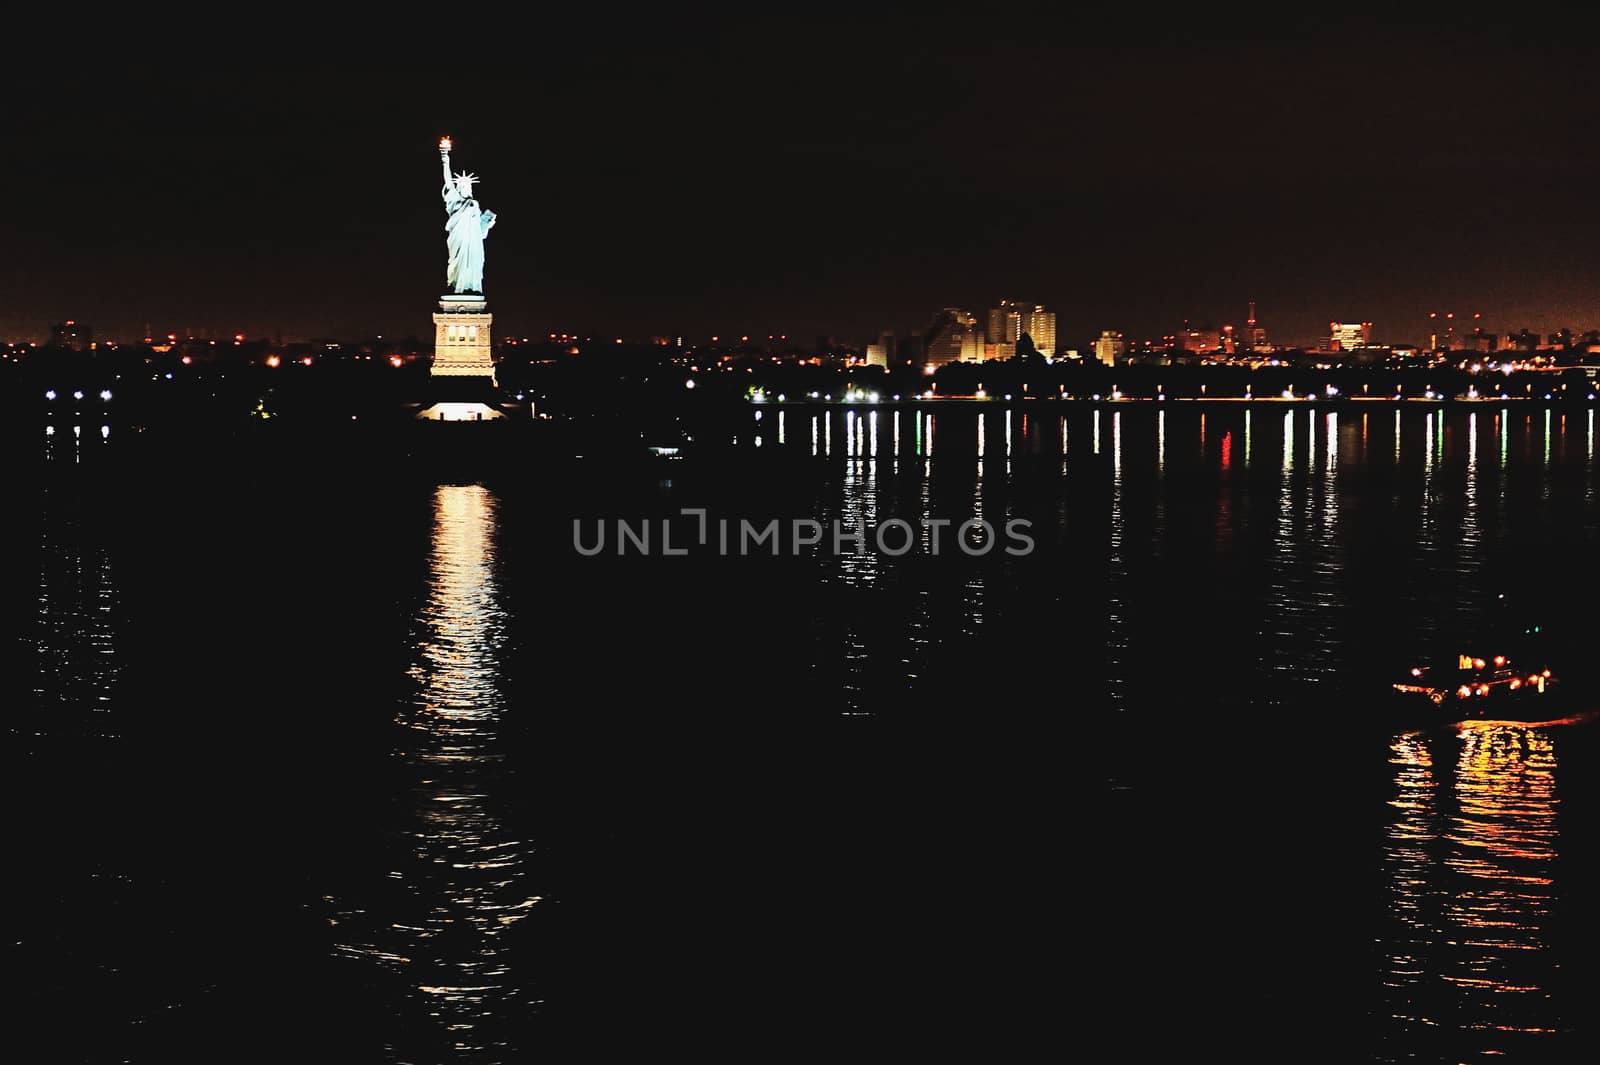 Statue of liberty at night reflect in water